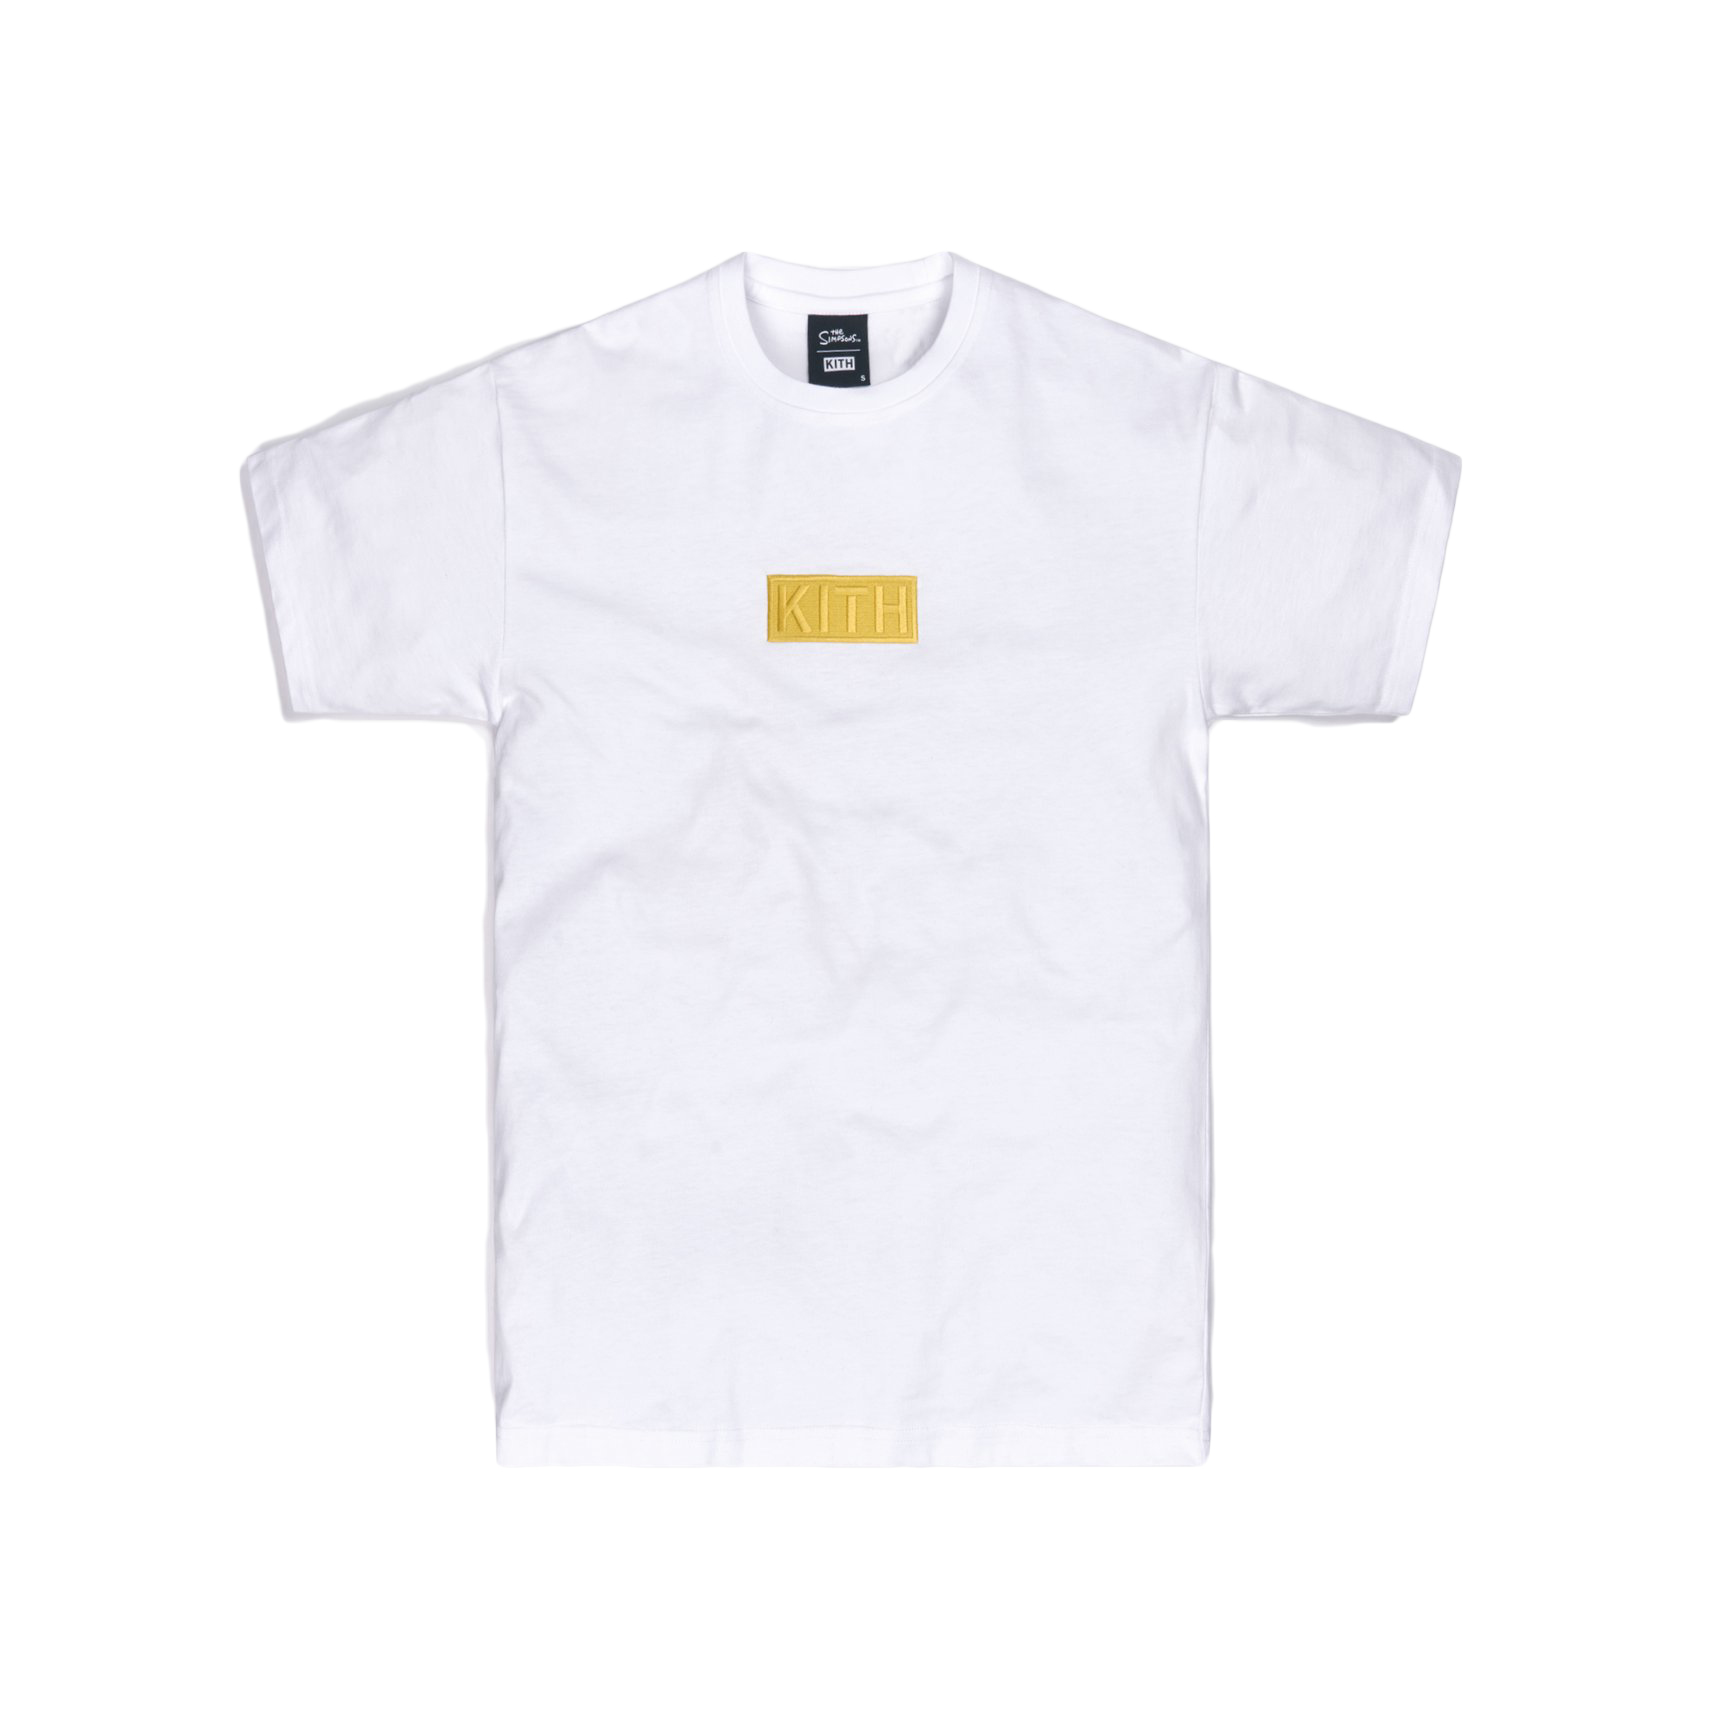 Kith x The Simpsons Family Stack Tee White Men's - SS21 - US